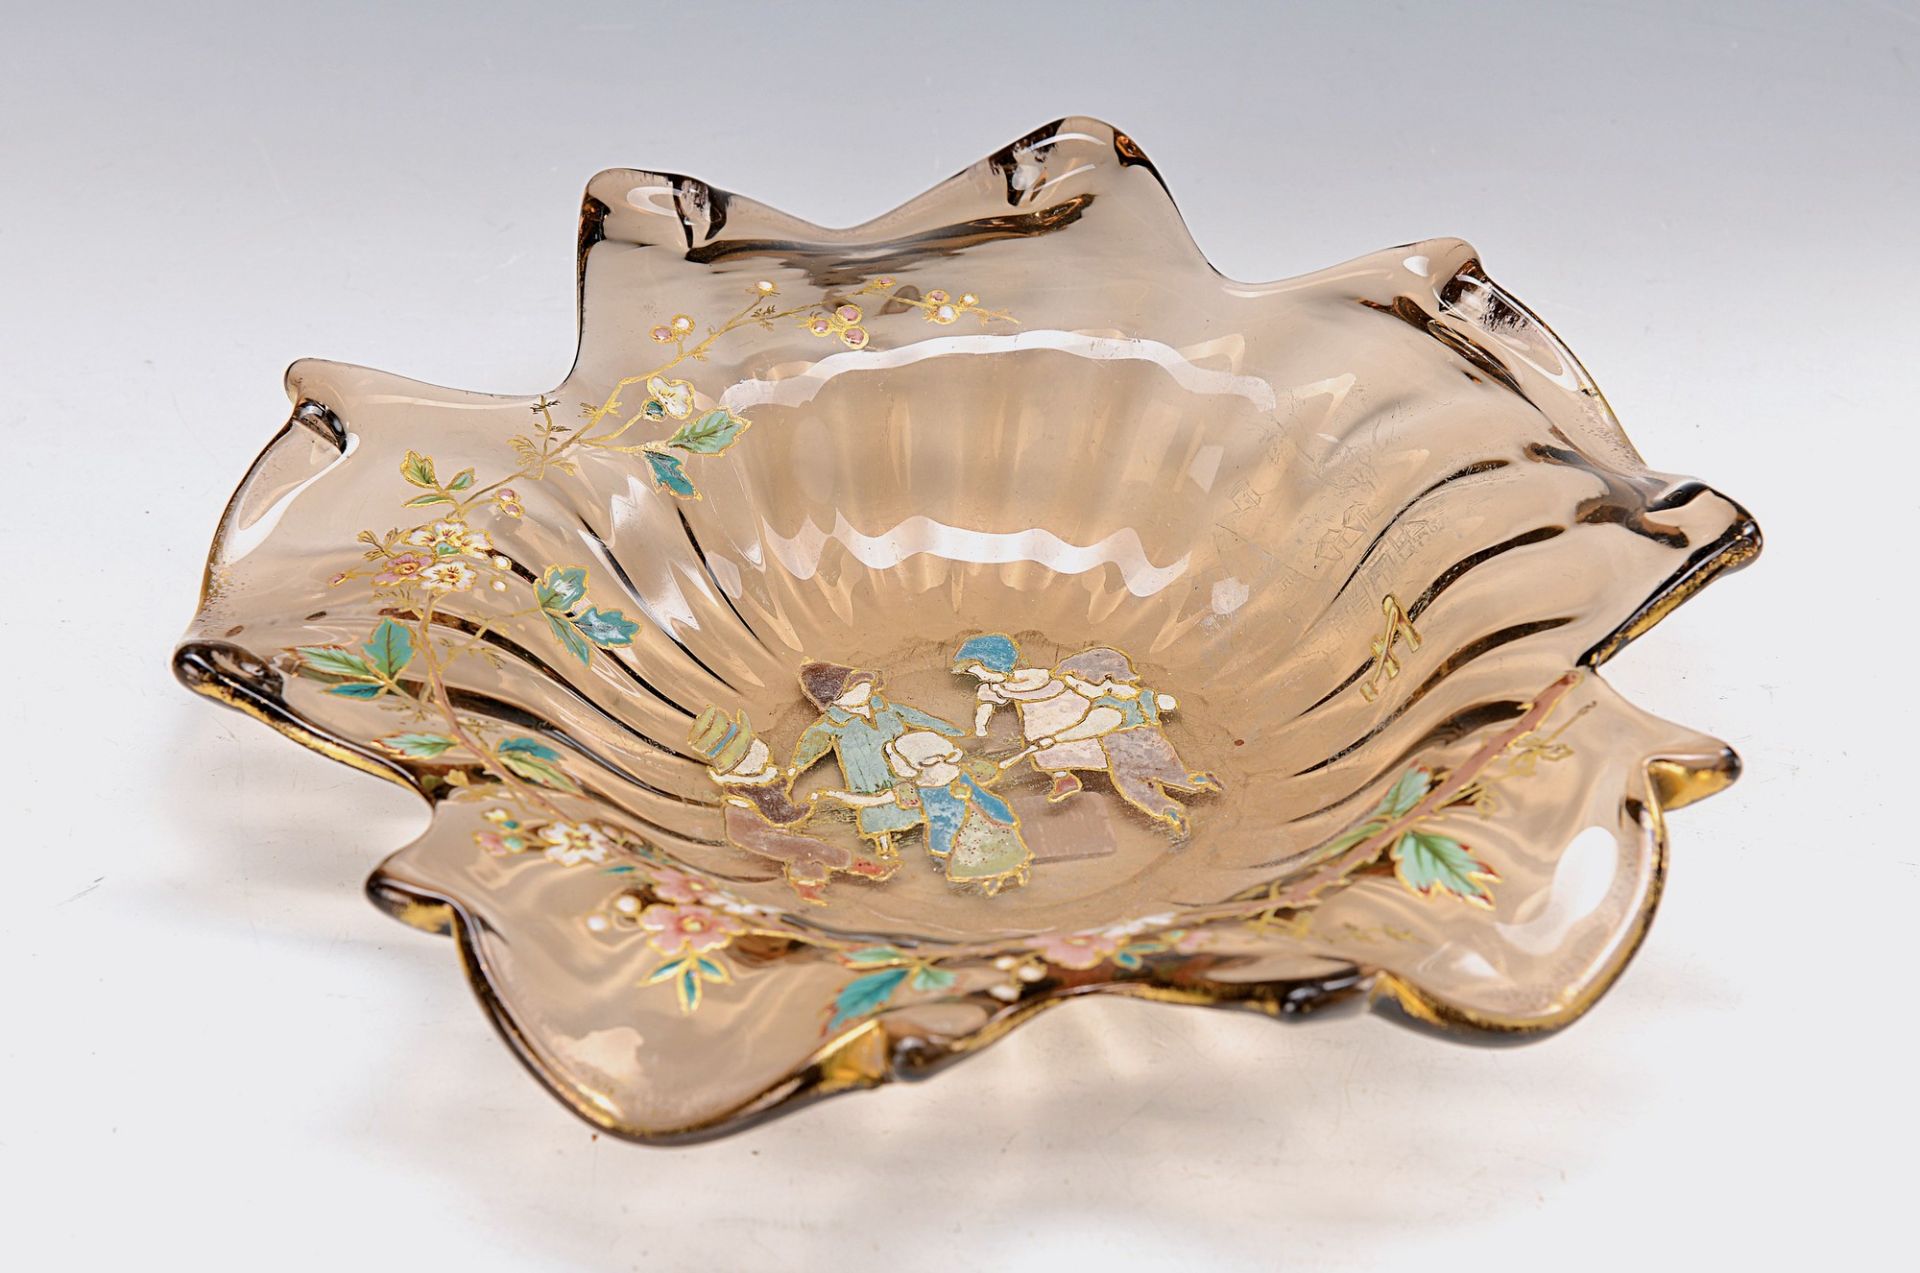 pompous bowl, E. Gallé Nancy, around 1890-95, smoke coloured glass, fivefold extended and stepped